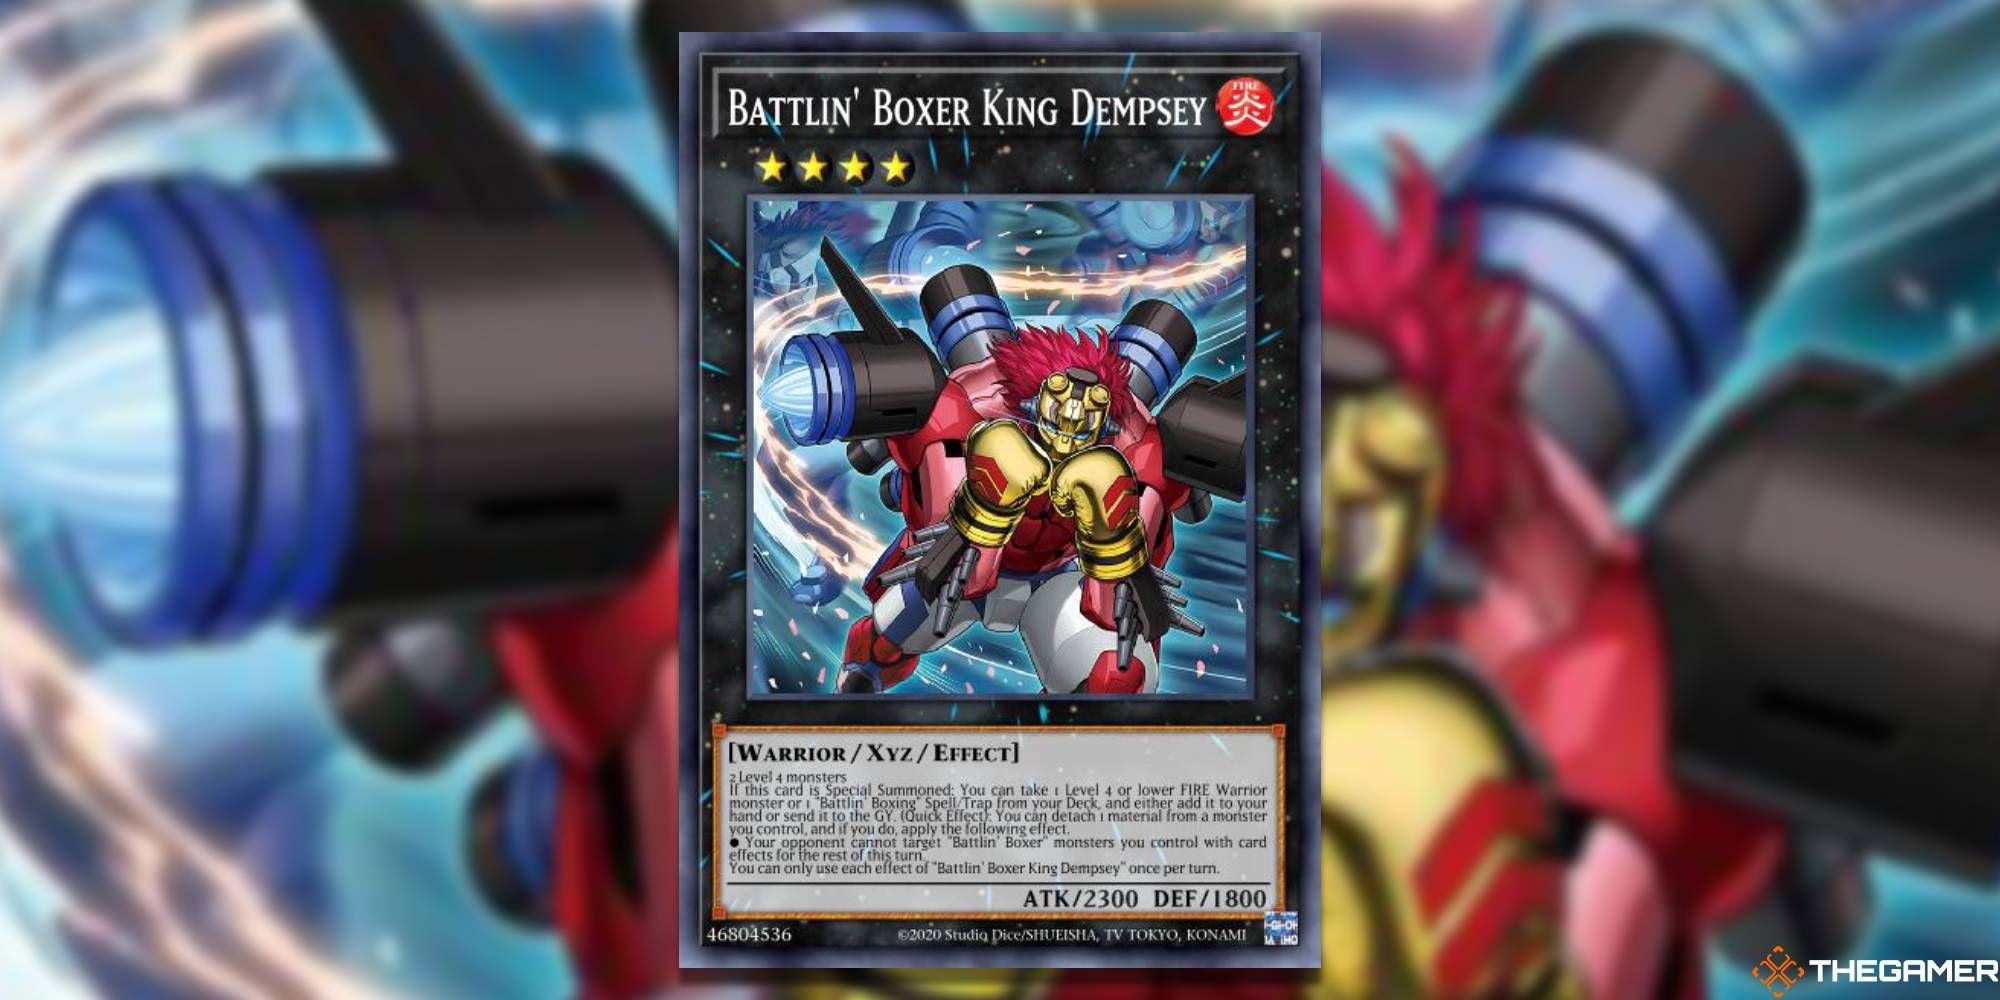 YGO Battlin' Boxer King Dempsey card and art background